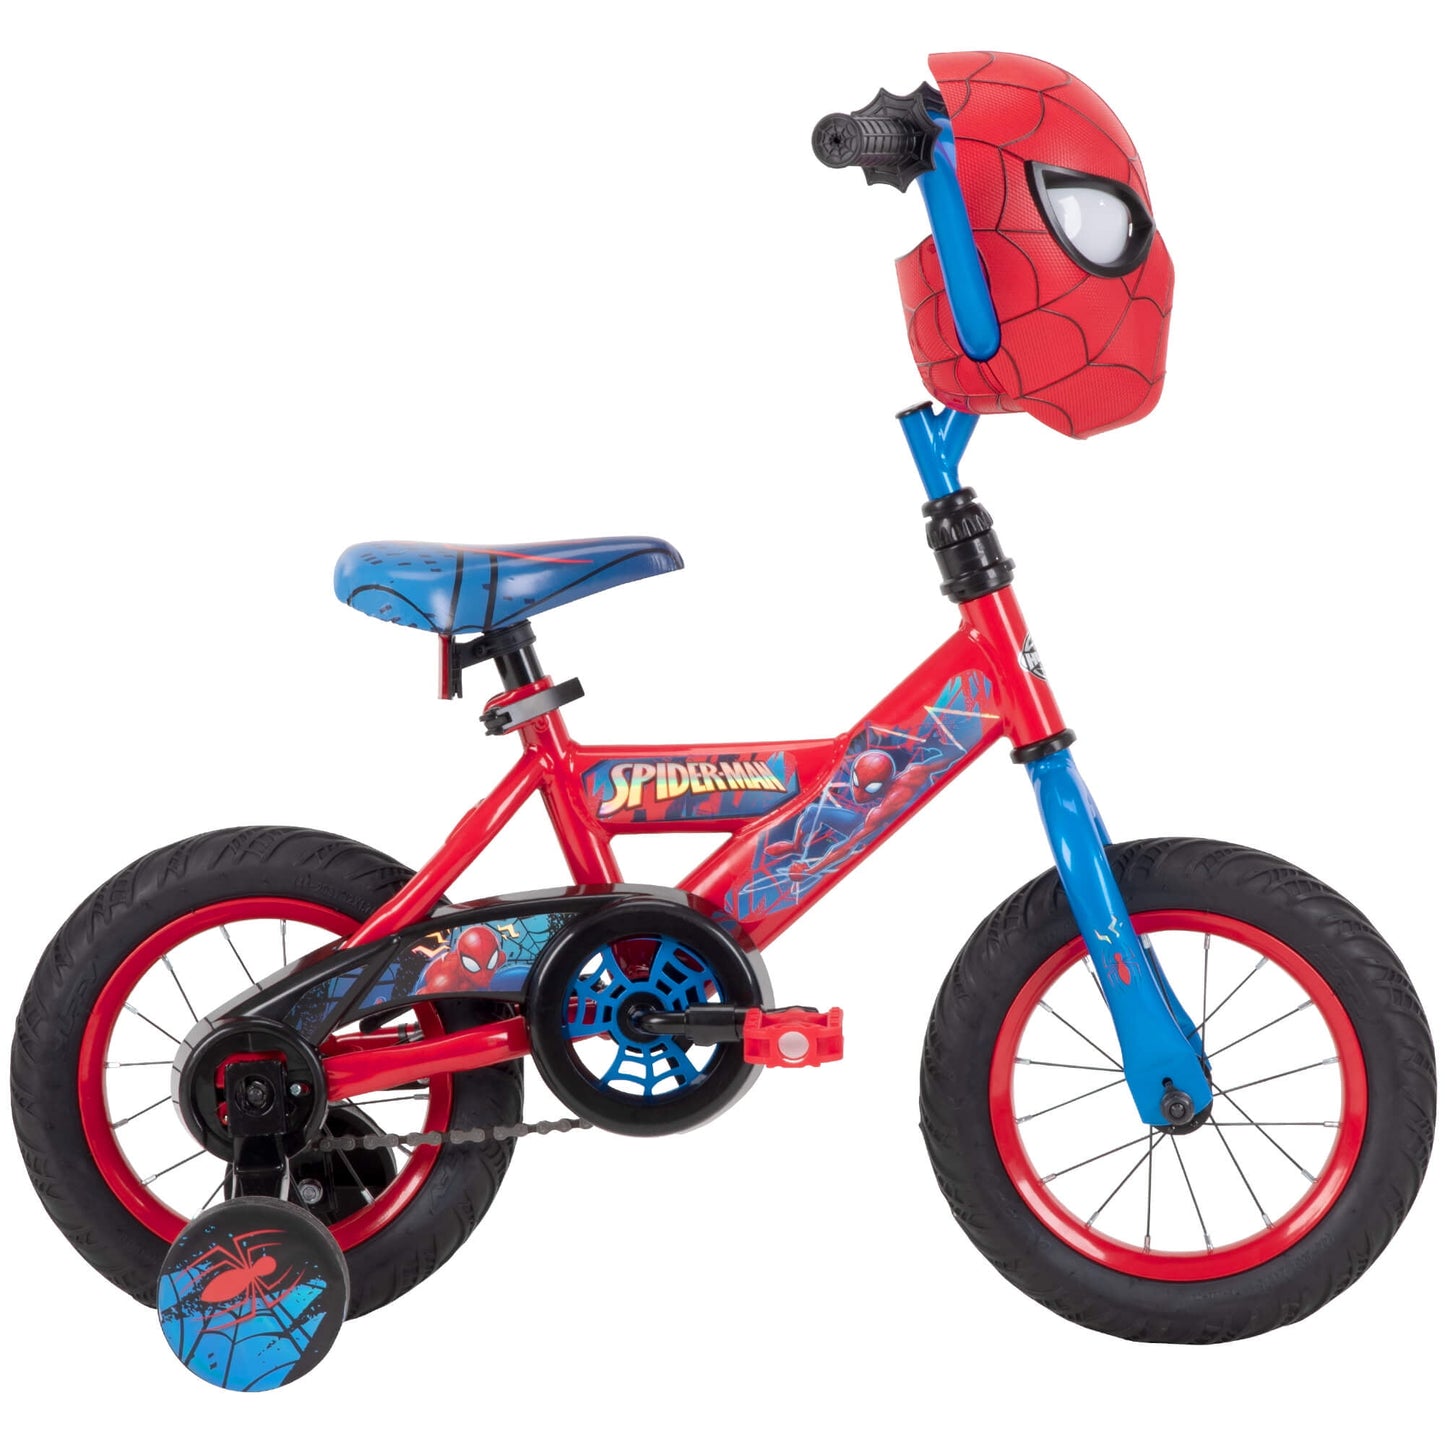 12" Marvel Spider-Man Bike with Training Wheels, for Boys', Red by Huffy